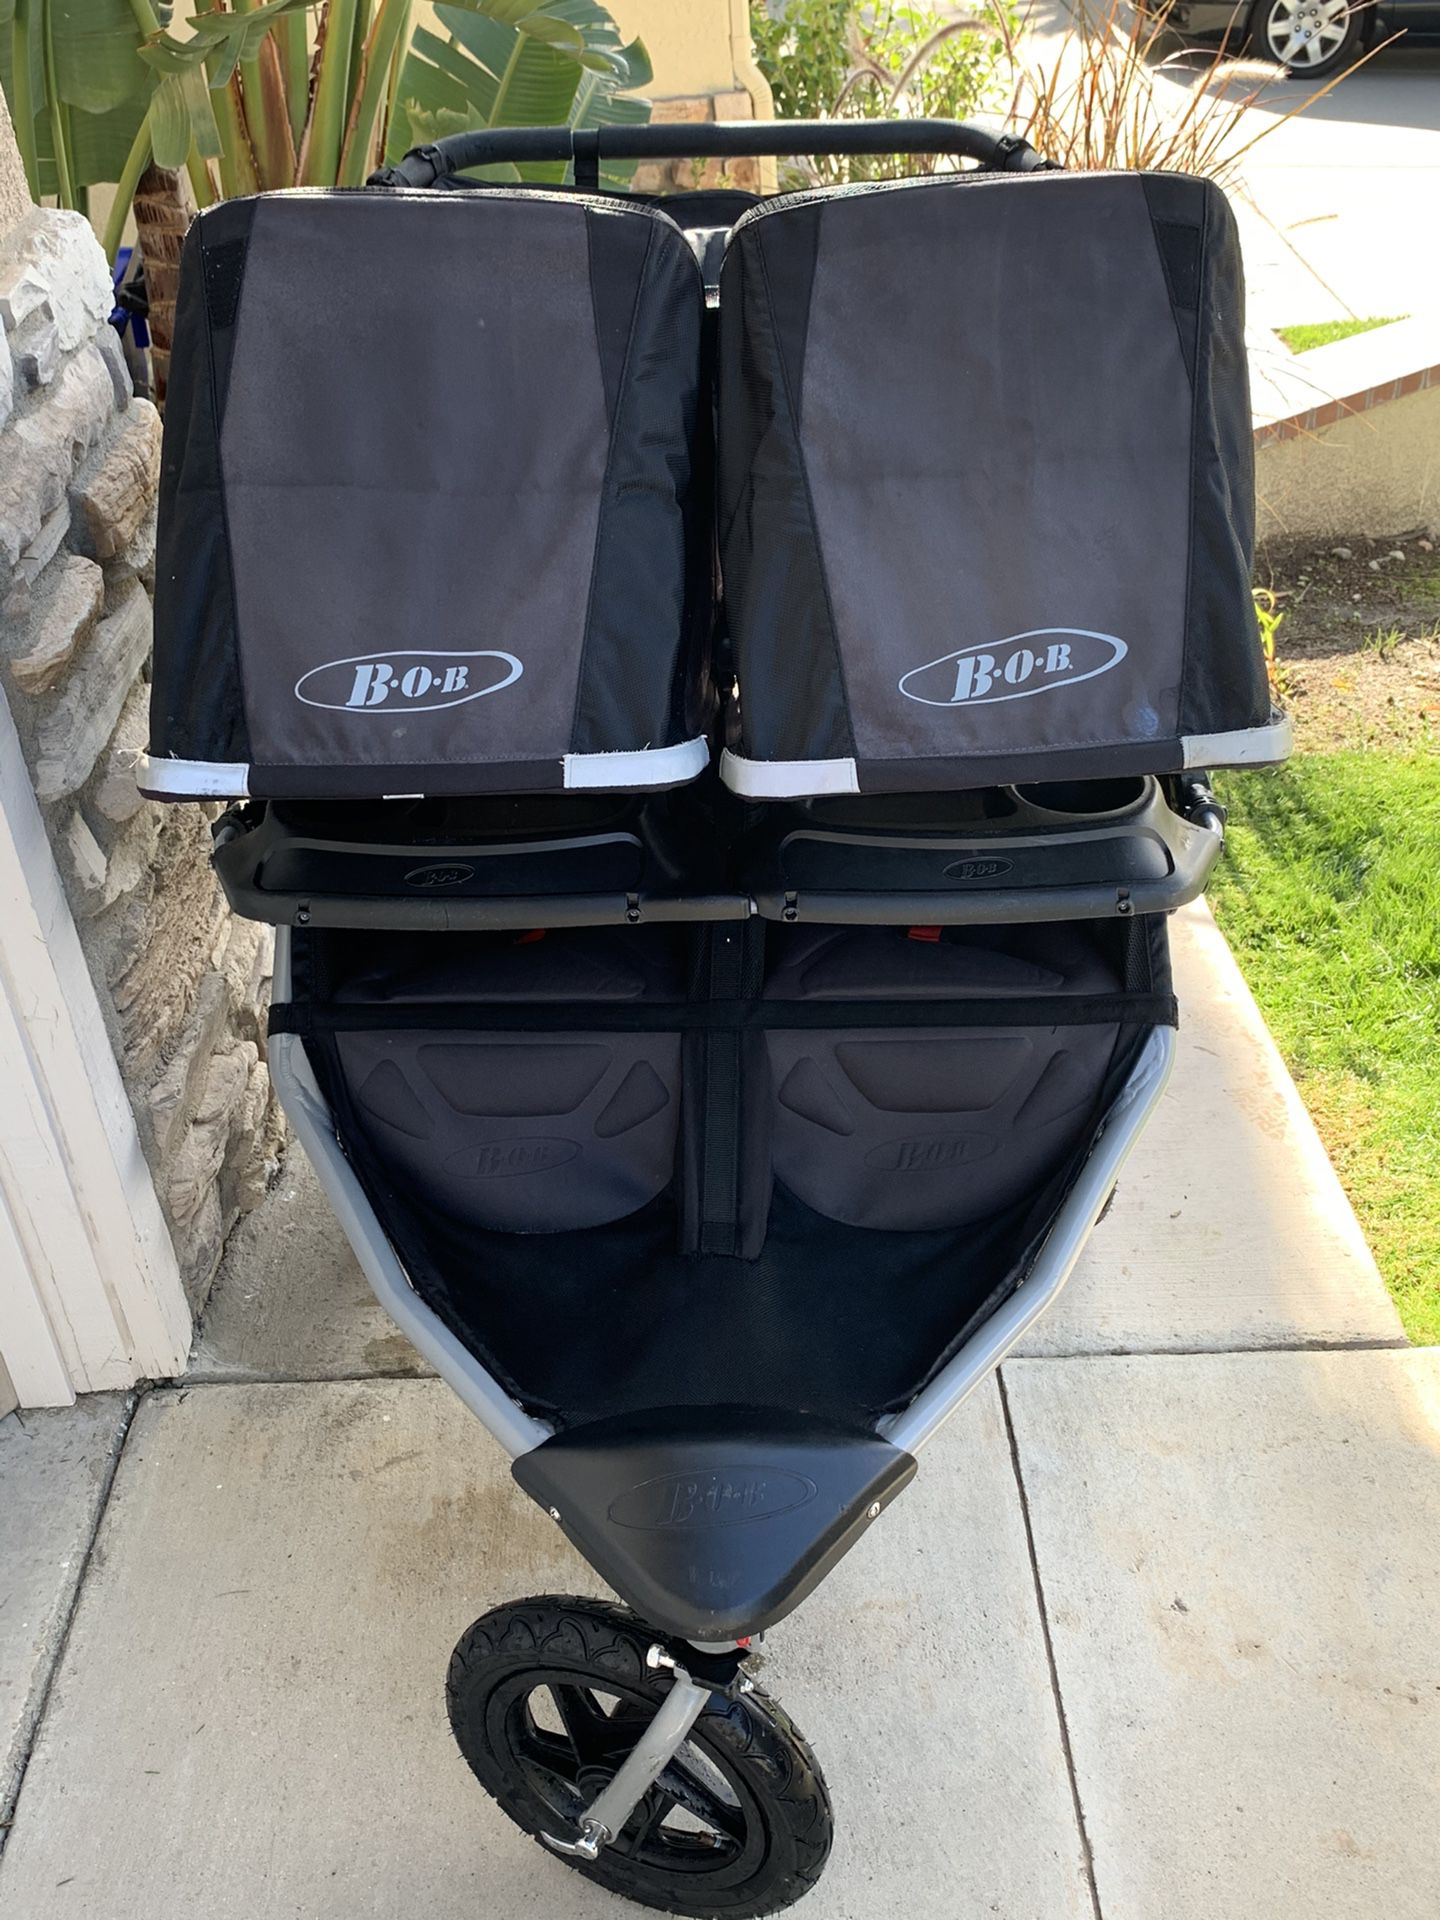 BLACK DOUBLE BOB JOGGING STROLLER W/HANDLE BAR & SNACK TRAY ATTACHMENT IN EXCELLENT CONDITION